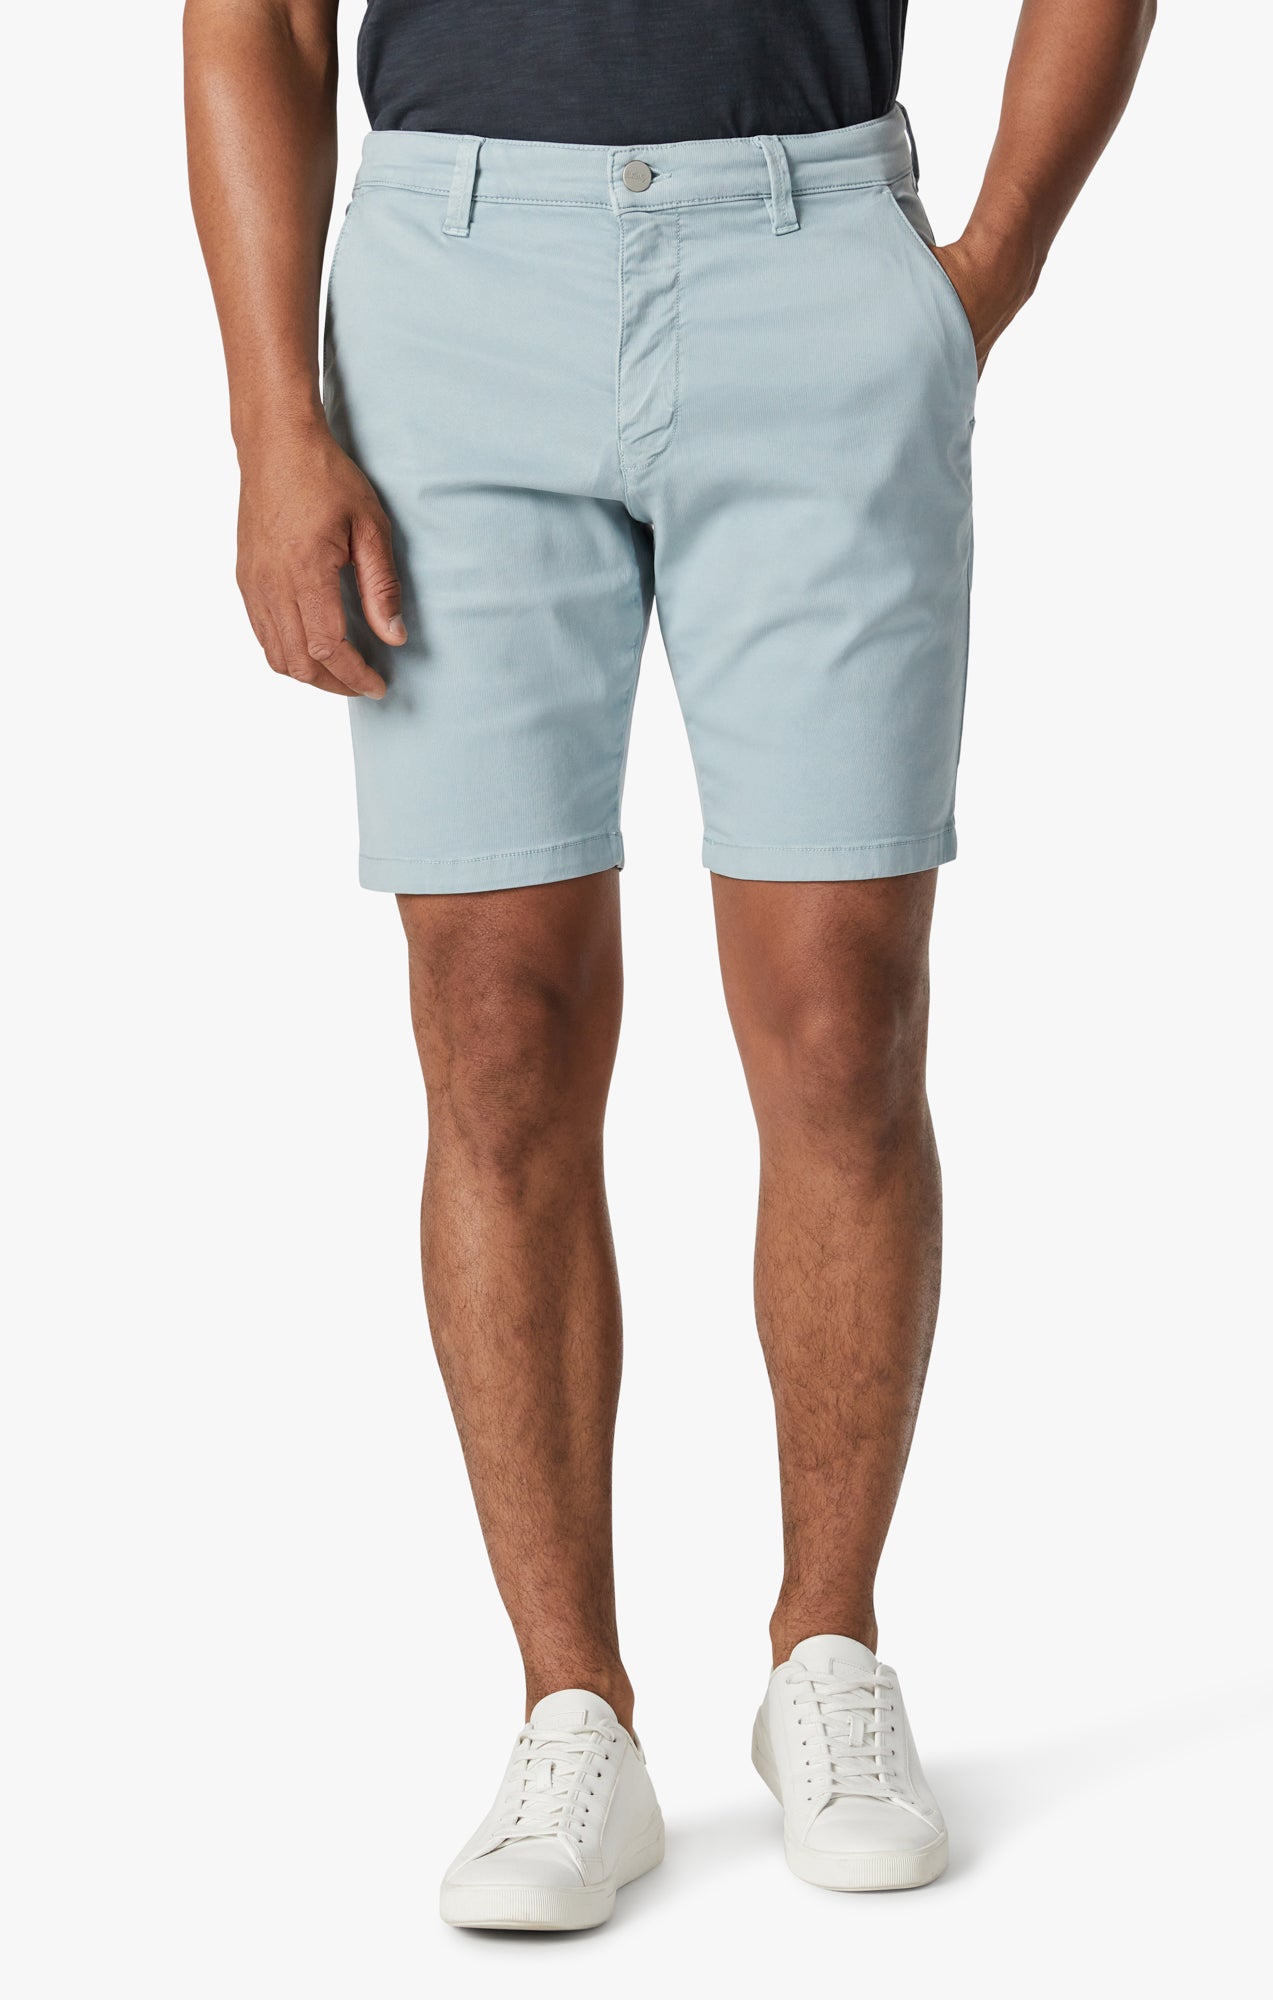 Arizona Shorts In Light Blue Soft Touch Image 2